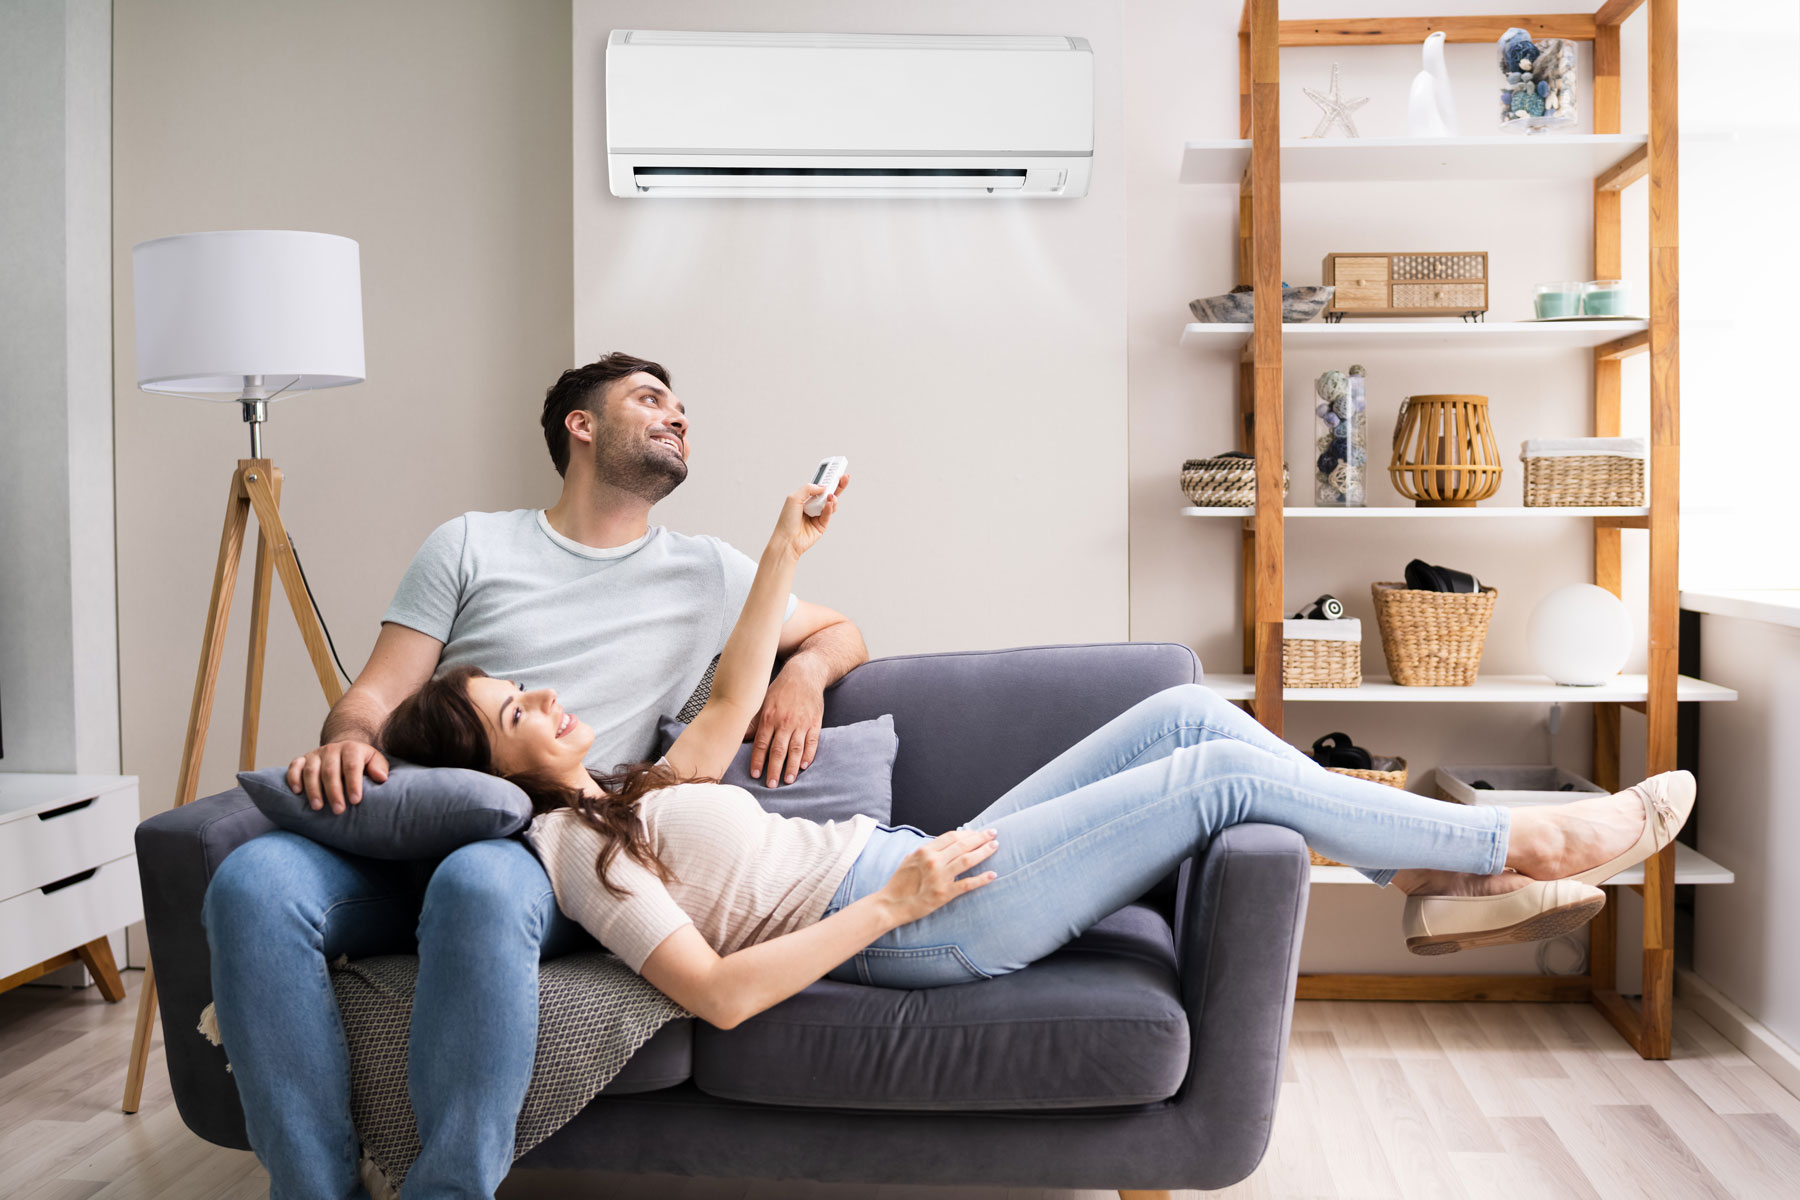 Air Conditioning Installation Prices from Eaglereach Mechanical